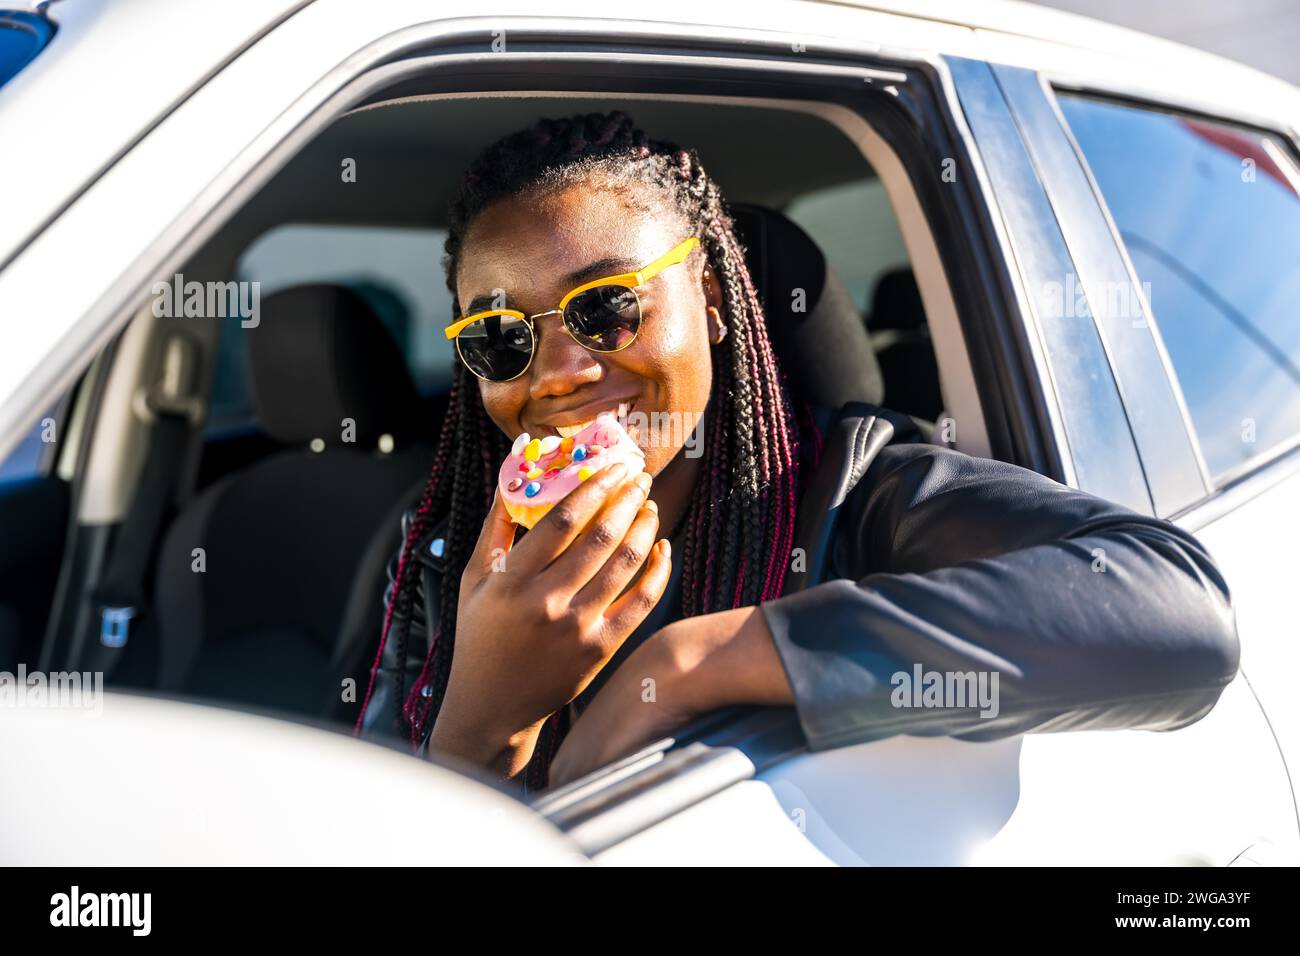 Cheerful african girl eating doughnut leaning in the car window sitting inside Stock Photo